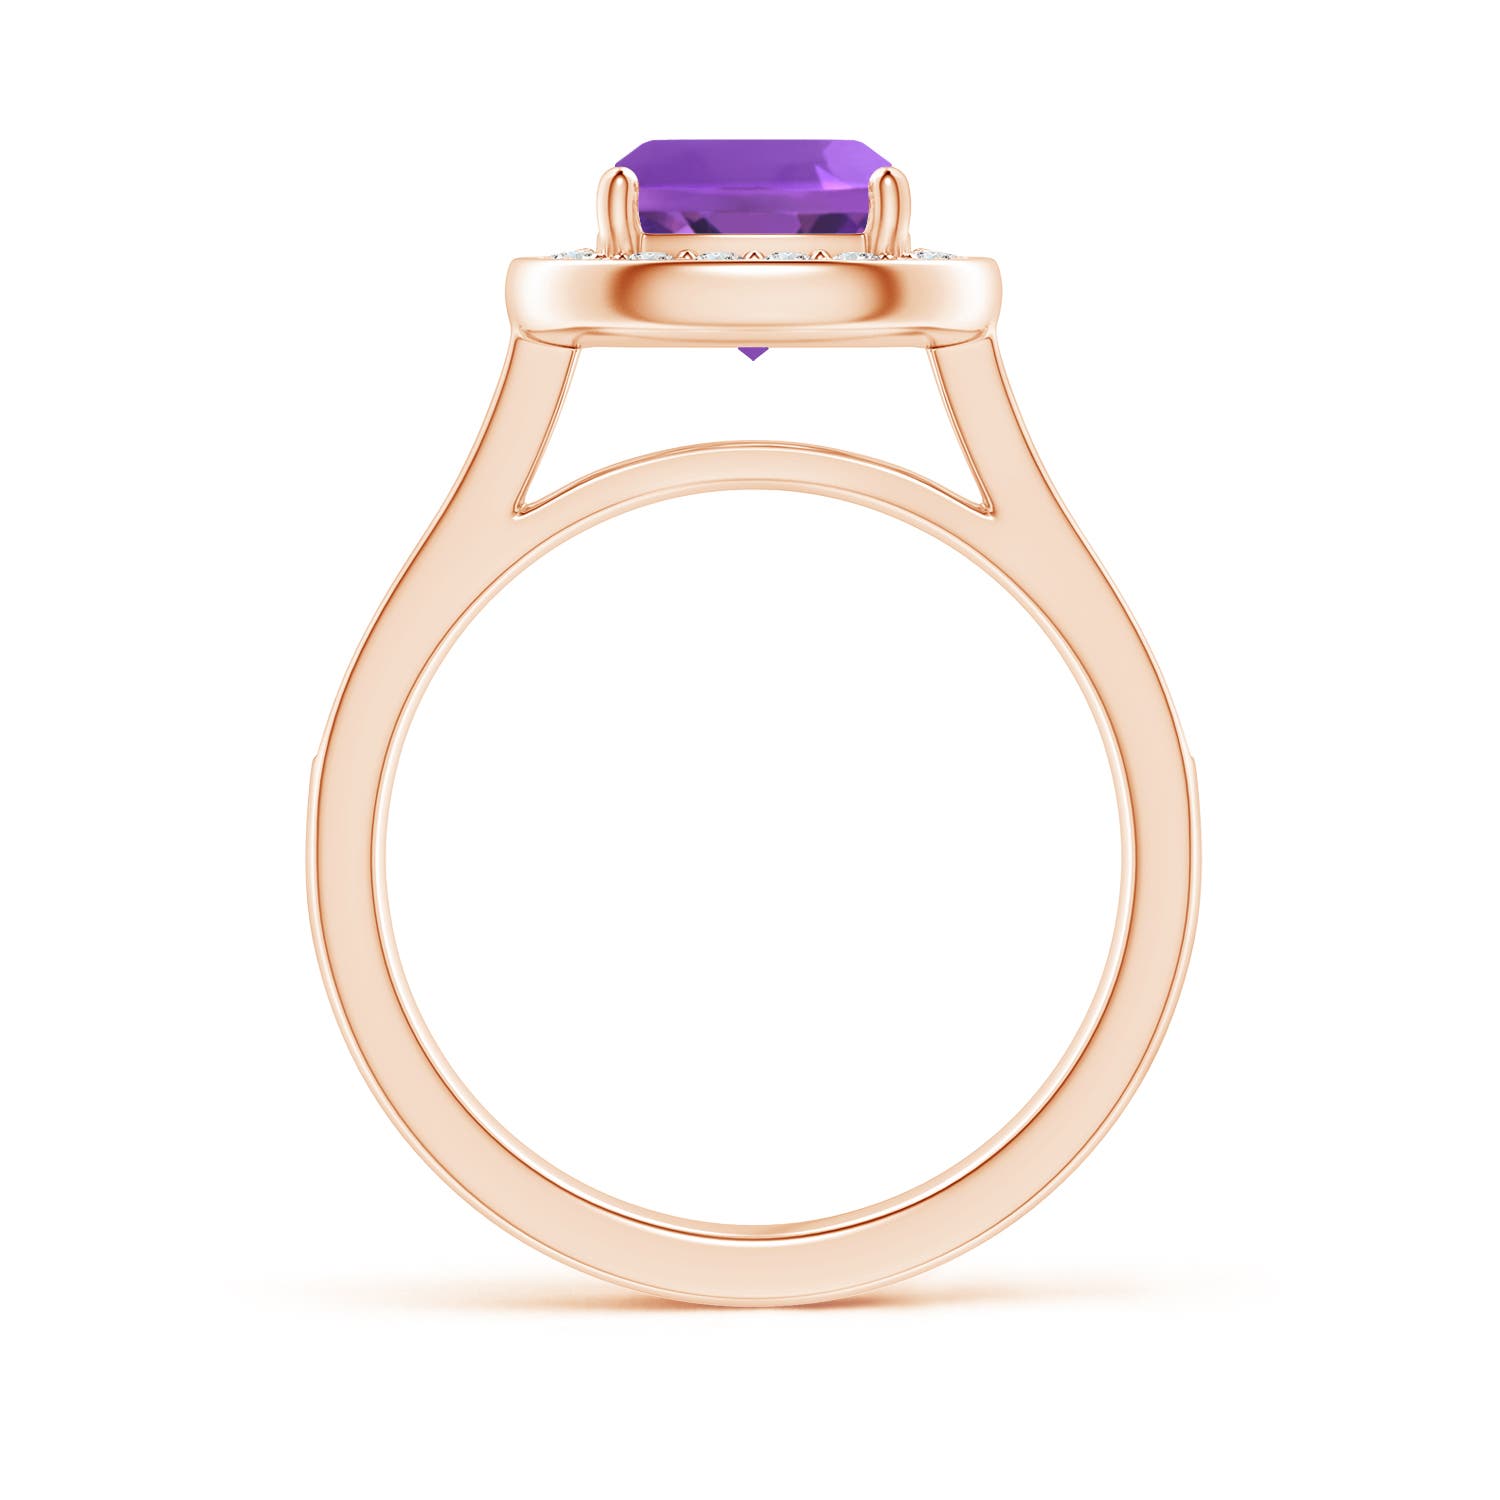 AAA - Amethyst / 1.74 CT / 14 KT Rose Gold